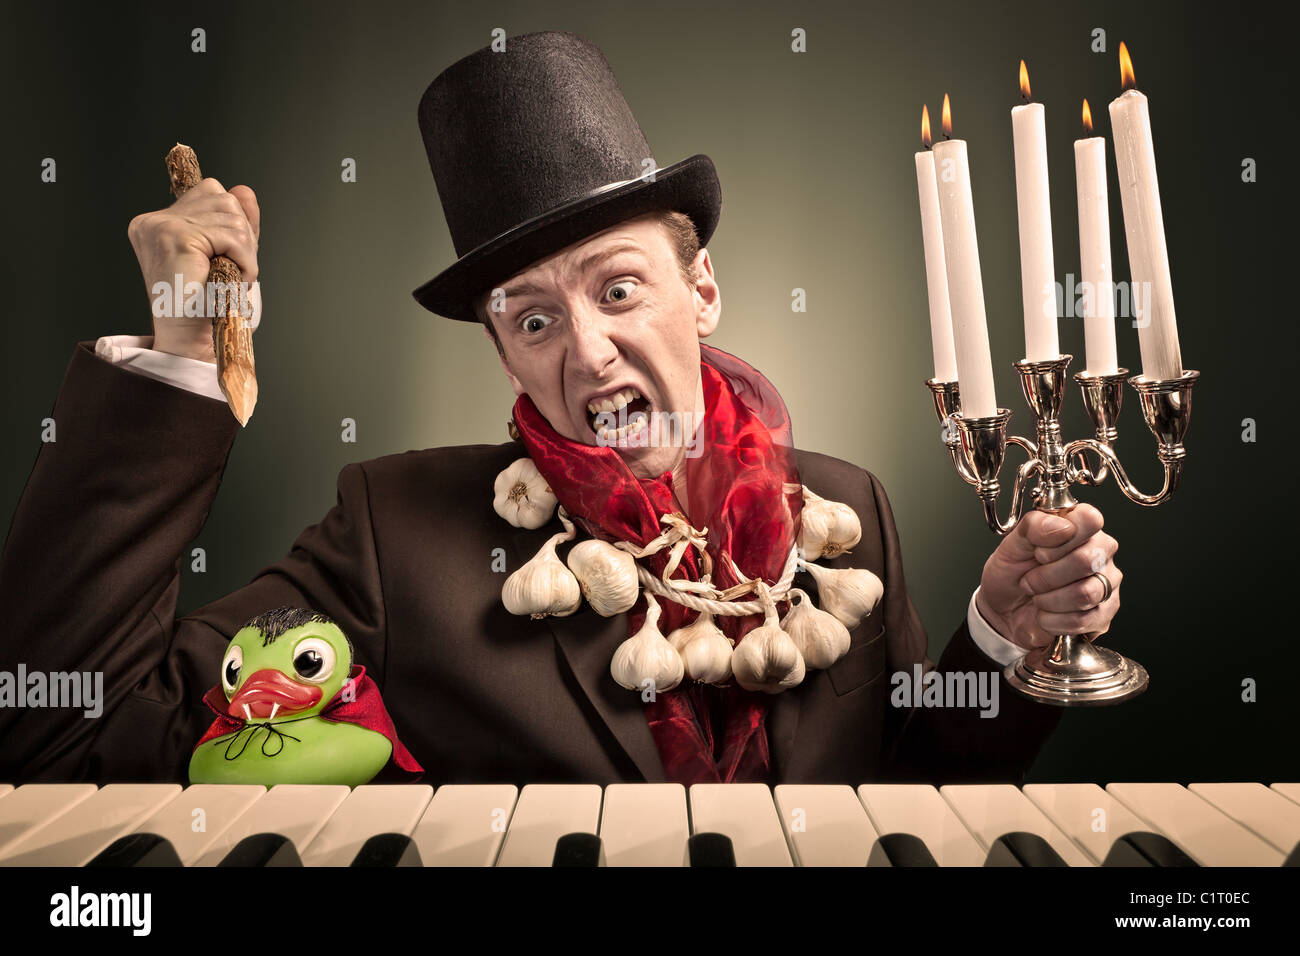 A man is trying to kill a vampire duck. The duck is a plastic toy. Stock Photo